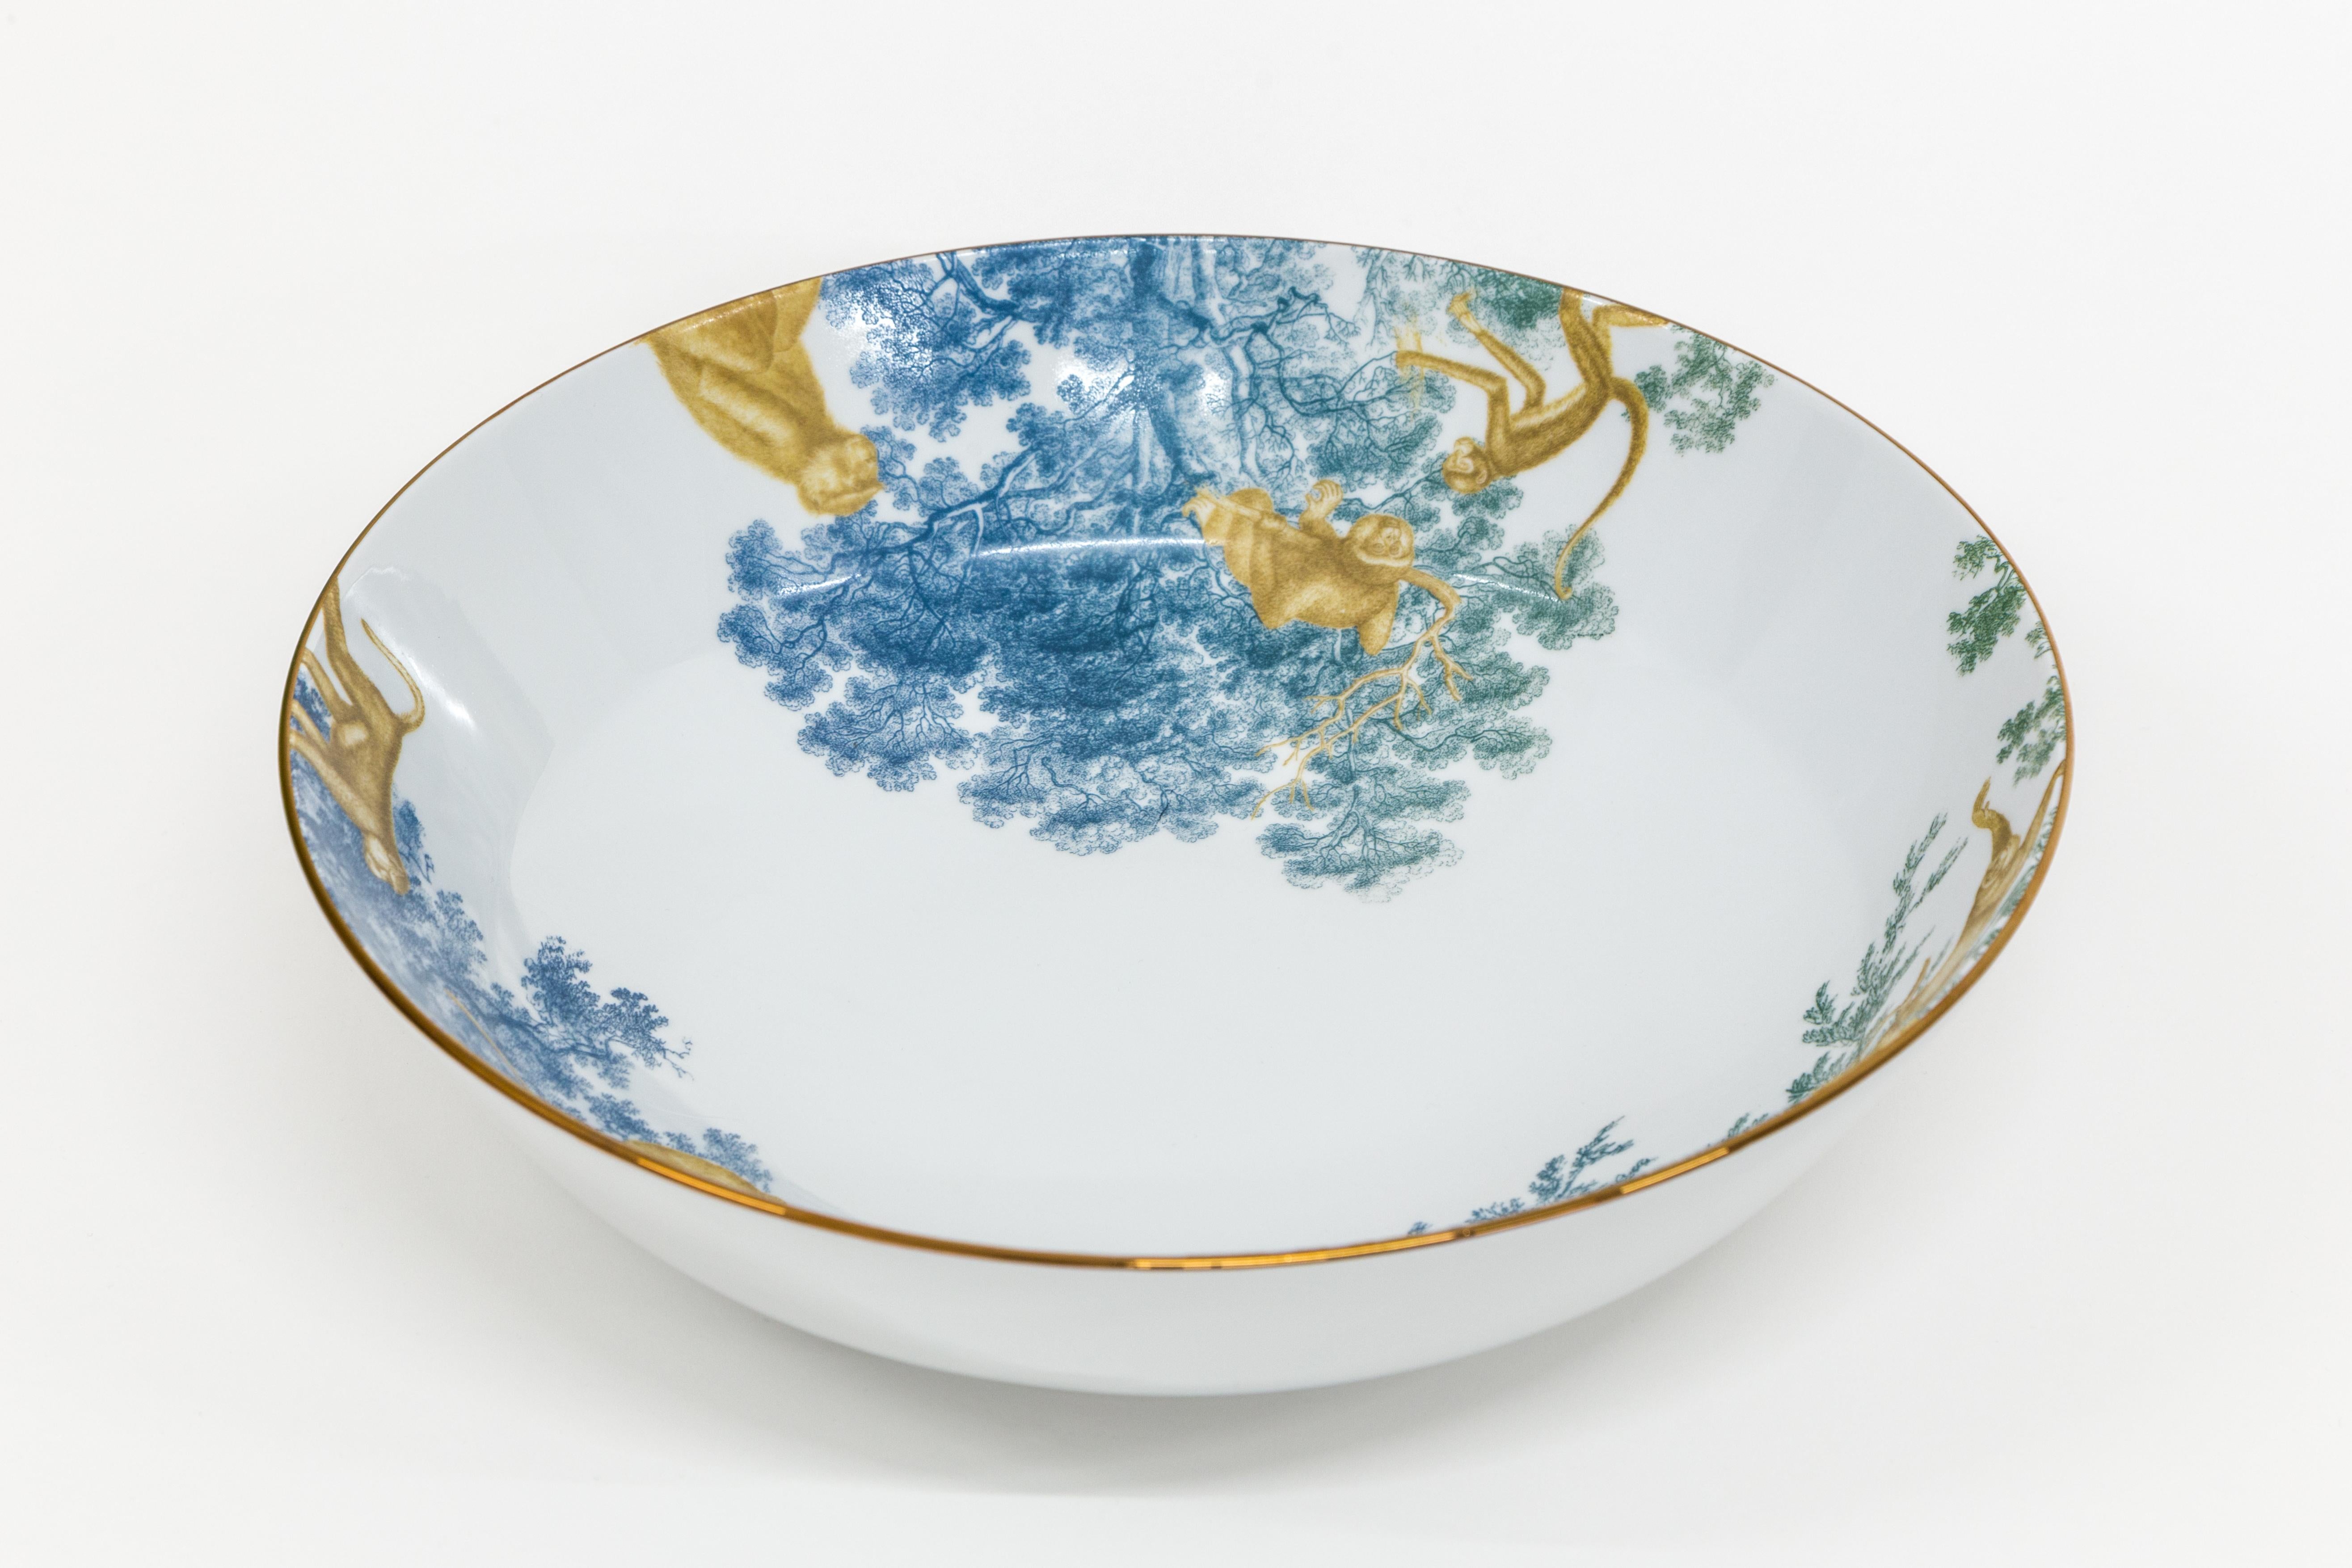 This 34cm diameter bowl is part of the Galtaji Monkey Temple collection by Grand Tour By Vito Nesta. The very versatile shape is suitable as a fruit stand, table centerpiece or ornamental bowl on any shelf. The bowl is surrounded by blue-green tree